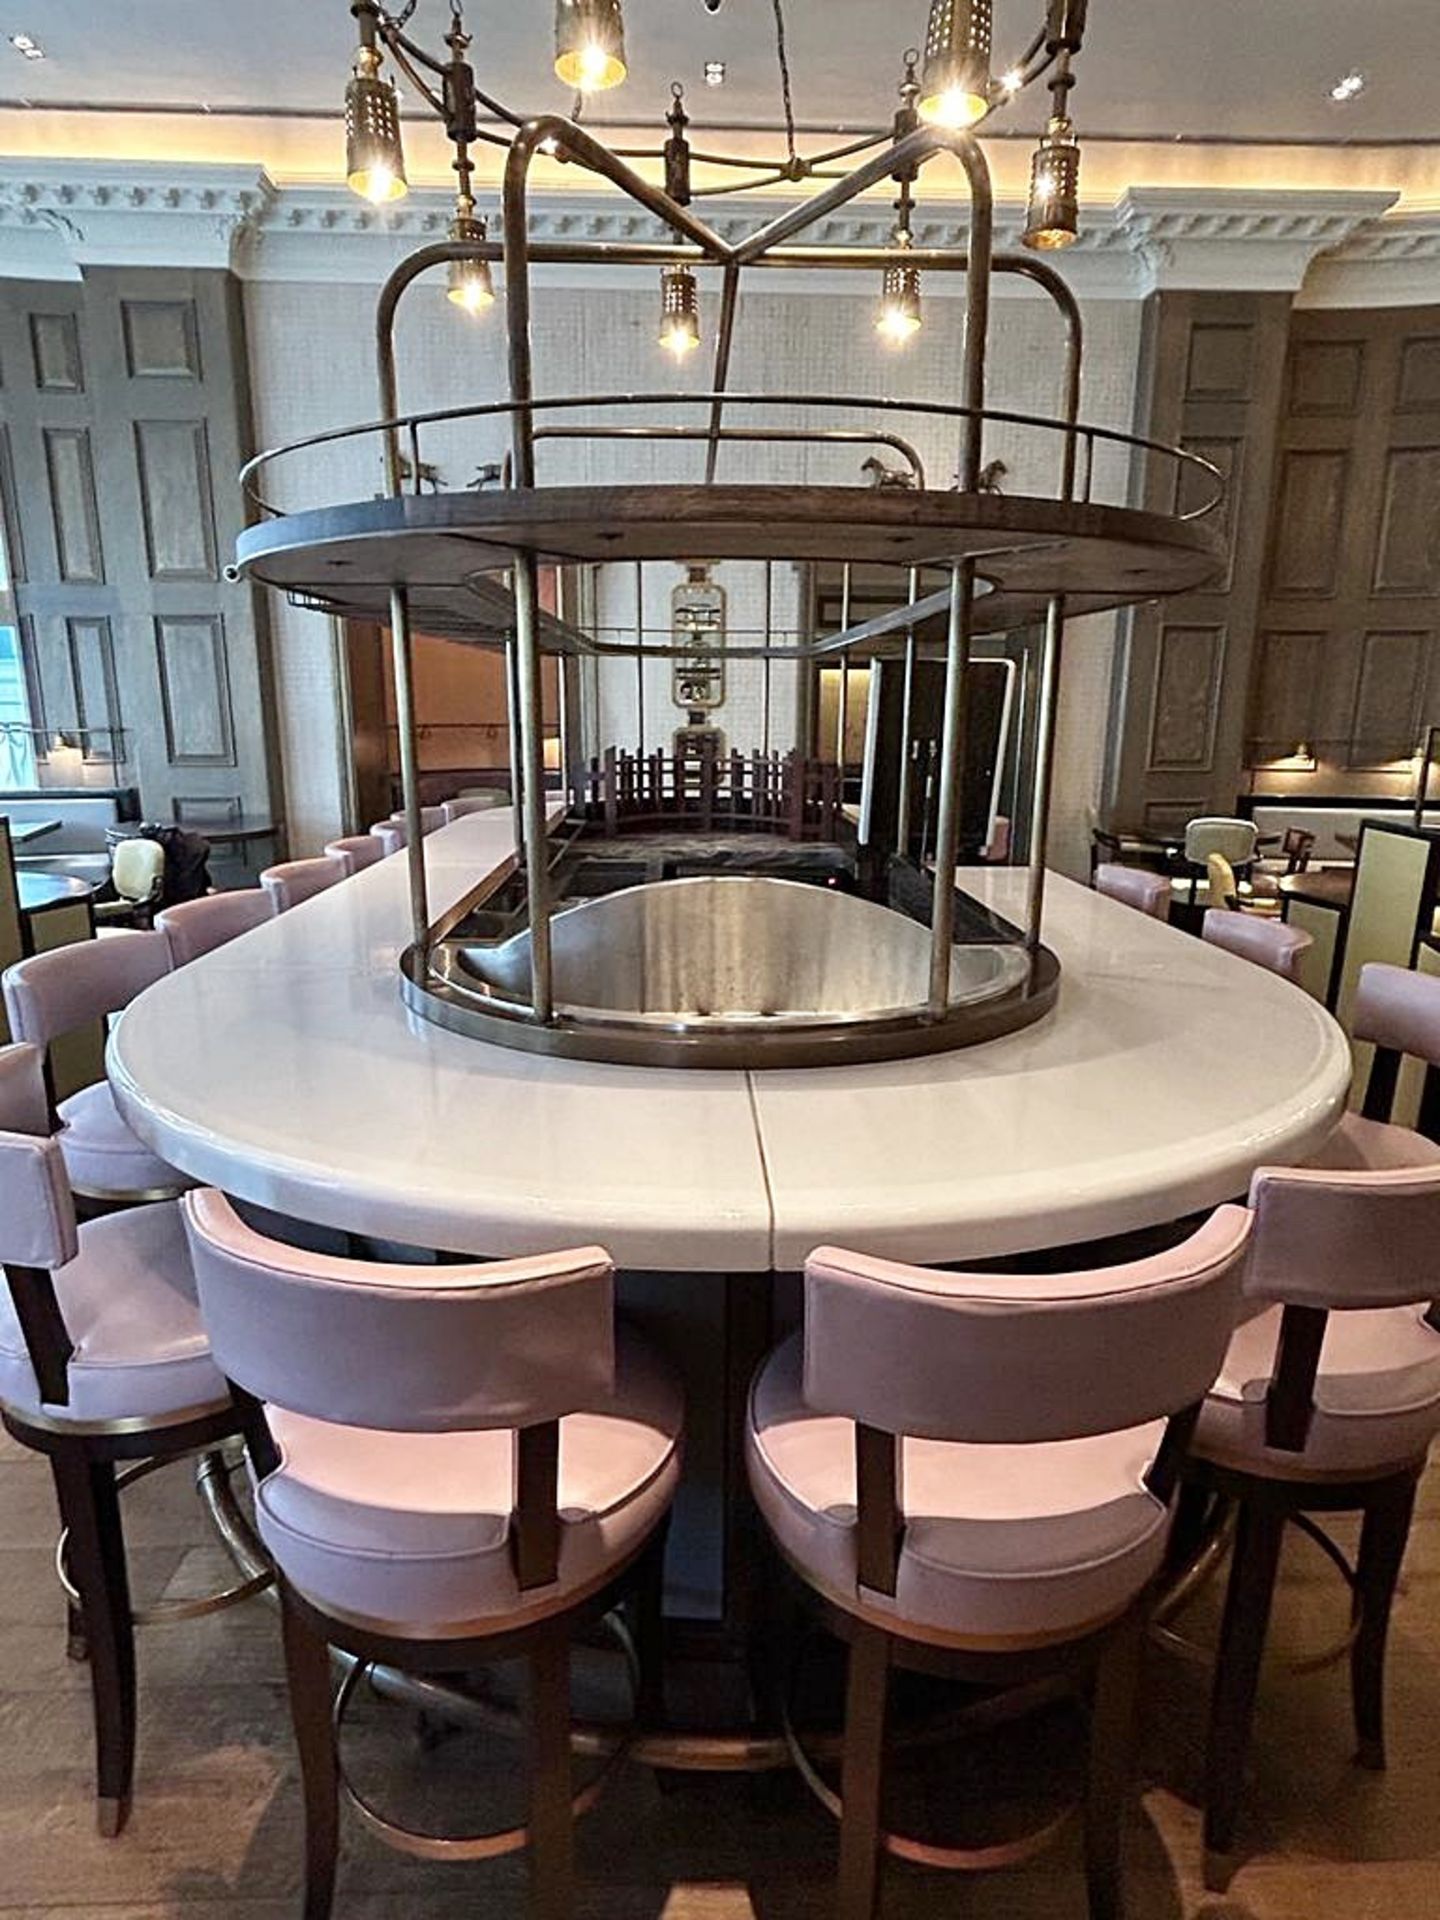 1 x Luxury Curved Restaurant 5.5-Metre Centrepiece Bar, Clad in Timber & Leather with 18 x Stools - Image 64 of 72